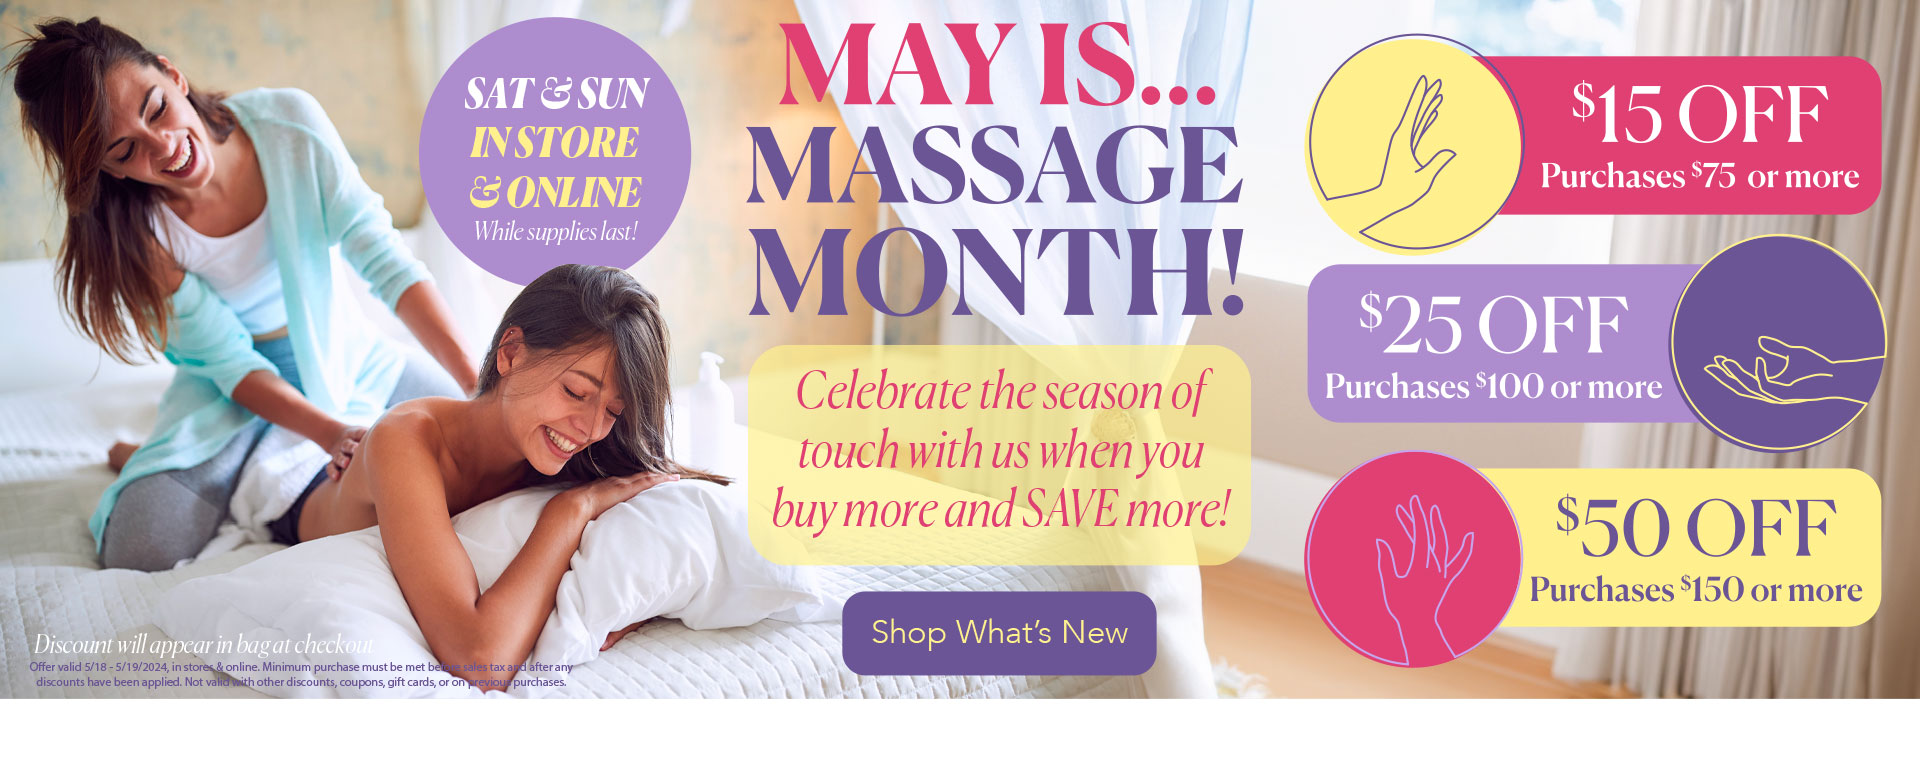 May is Massage Month - Celebrate the season of touch with us when you  buy more and SAVE more! - $15 OFF purchase of $75 - $25 OFF purchase of $100 - $50 off purchase of $150+